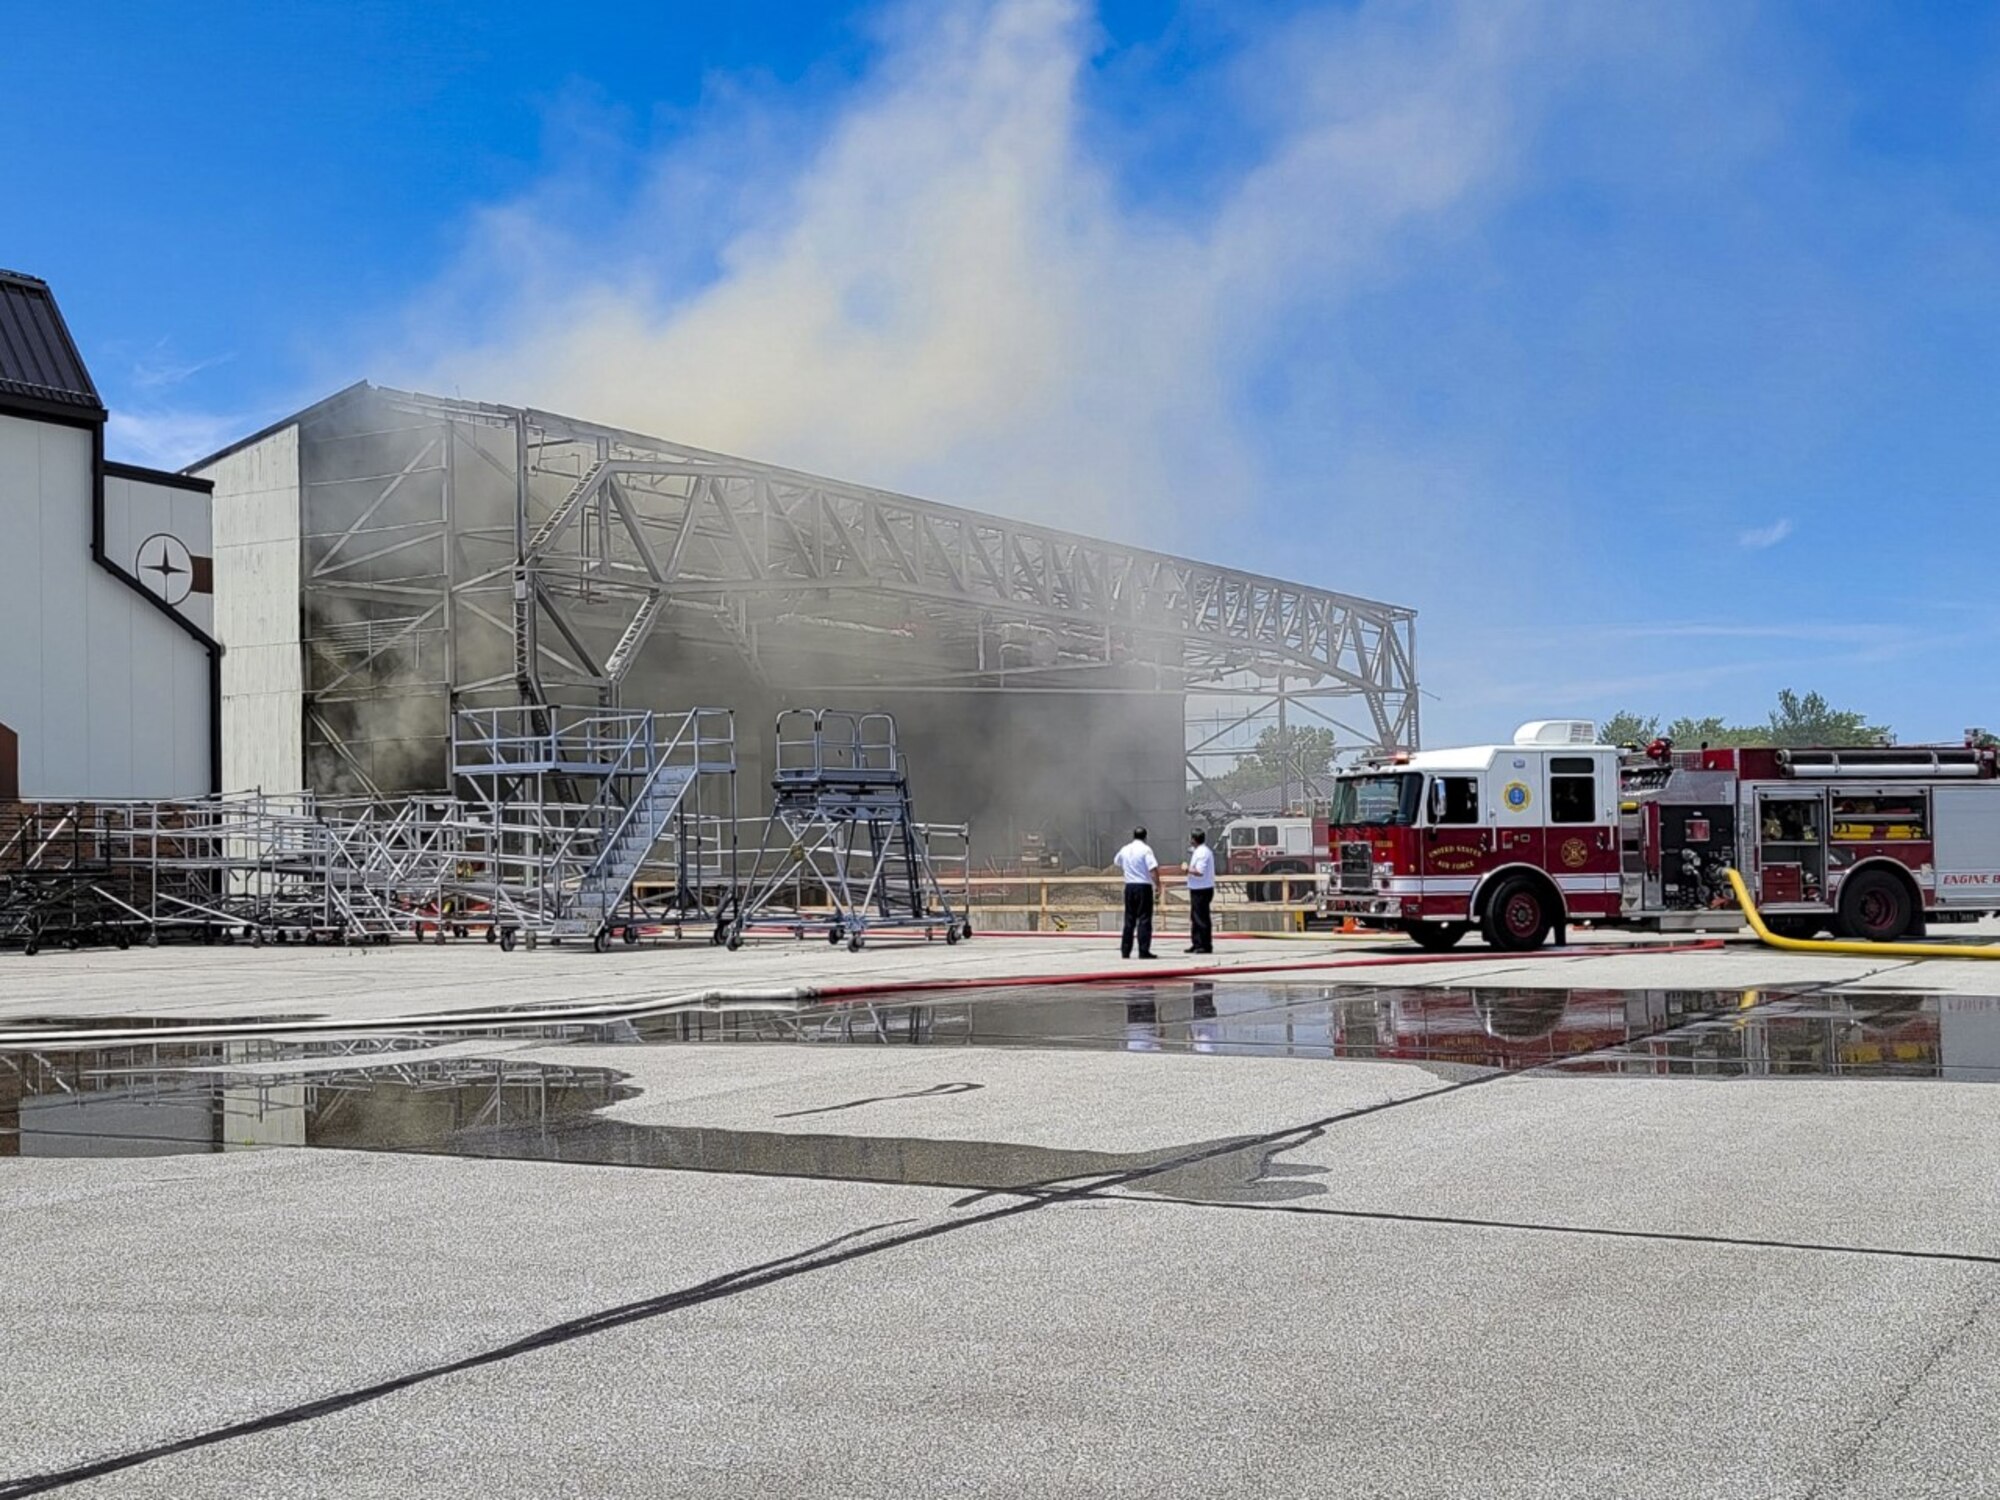 One person suffered minor smoke inhalation injuries when a fire broke out in Dock 5 at Grissom ARB. 
The fire began at approximately 2:15 p.m. and was located in an aircraft hangar that is undergoing extensive renovation. No aircraft were affected. (Air Force photo/Staff Sgt. Chris Massey)